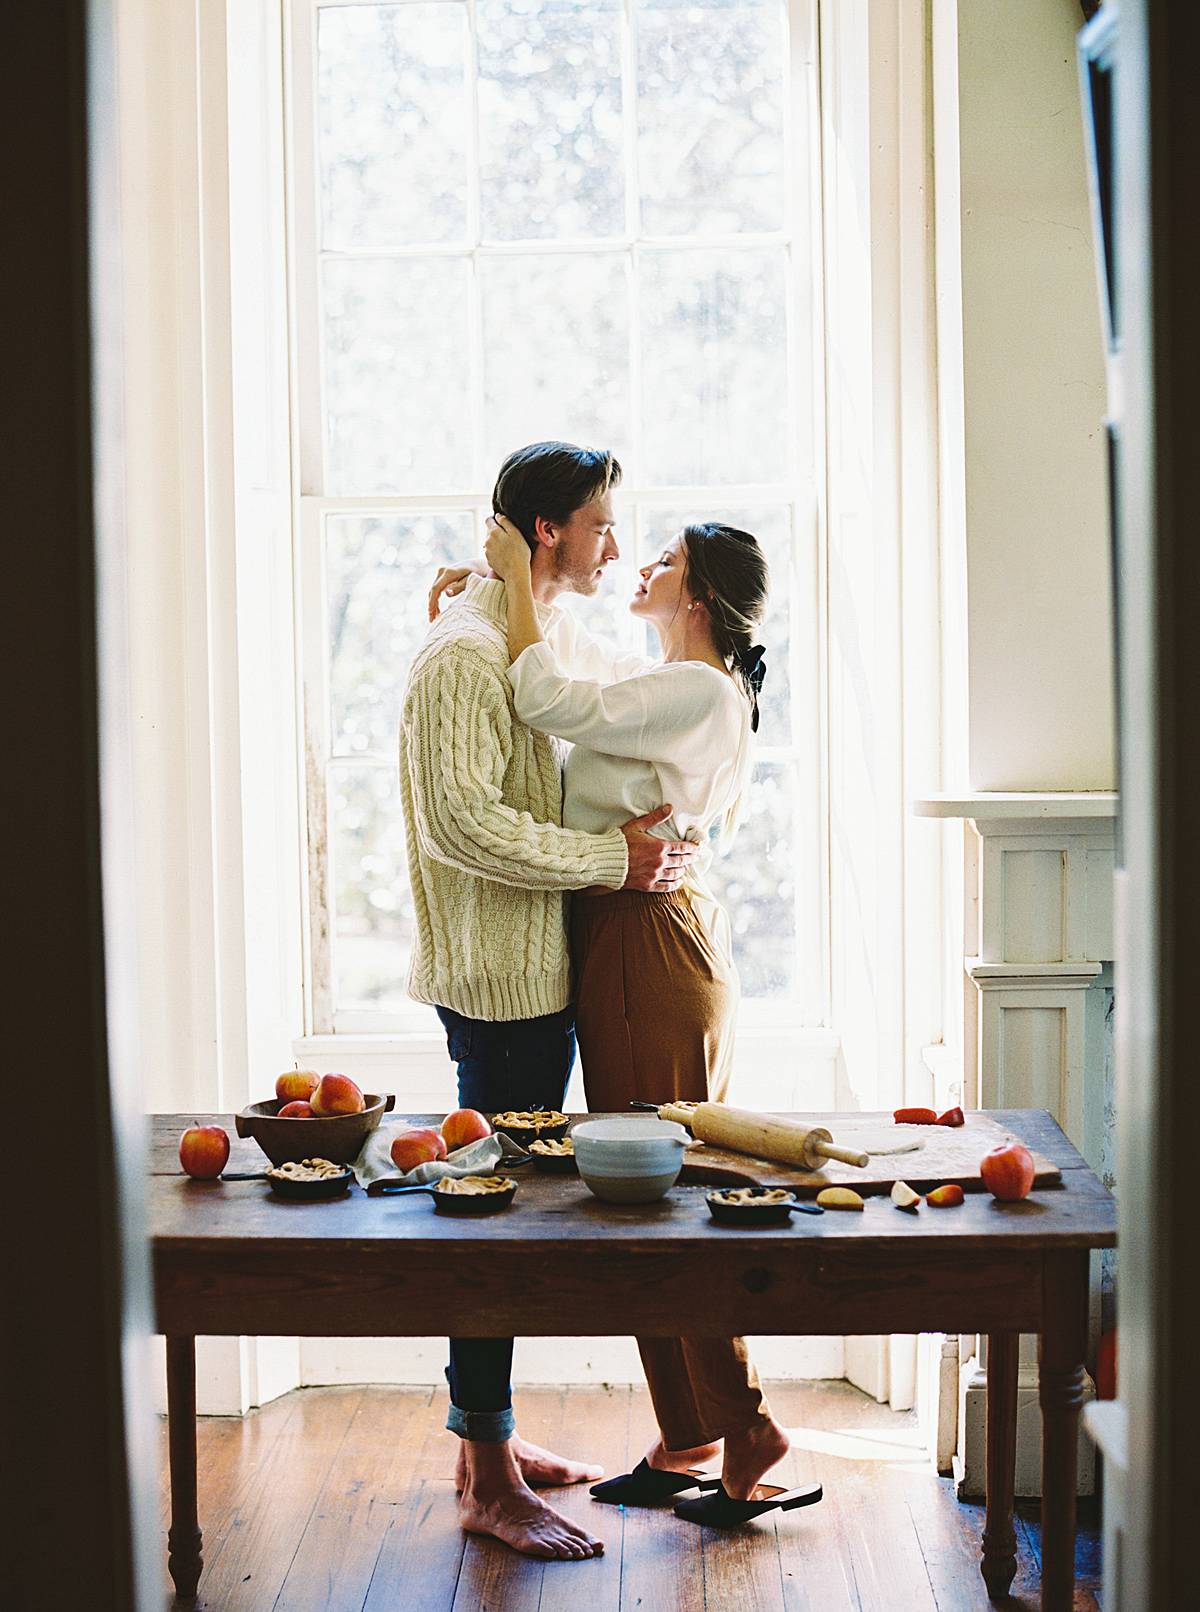 charleston elopement photography adventure on film with bride and groom in kitchen making pies